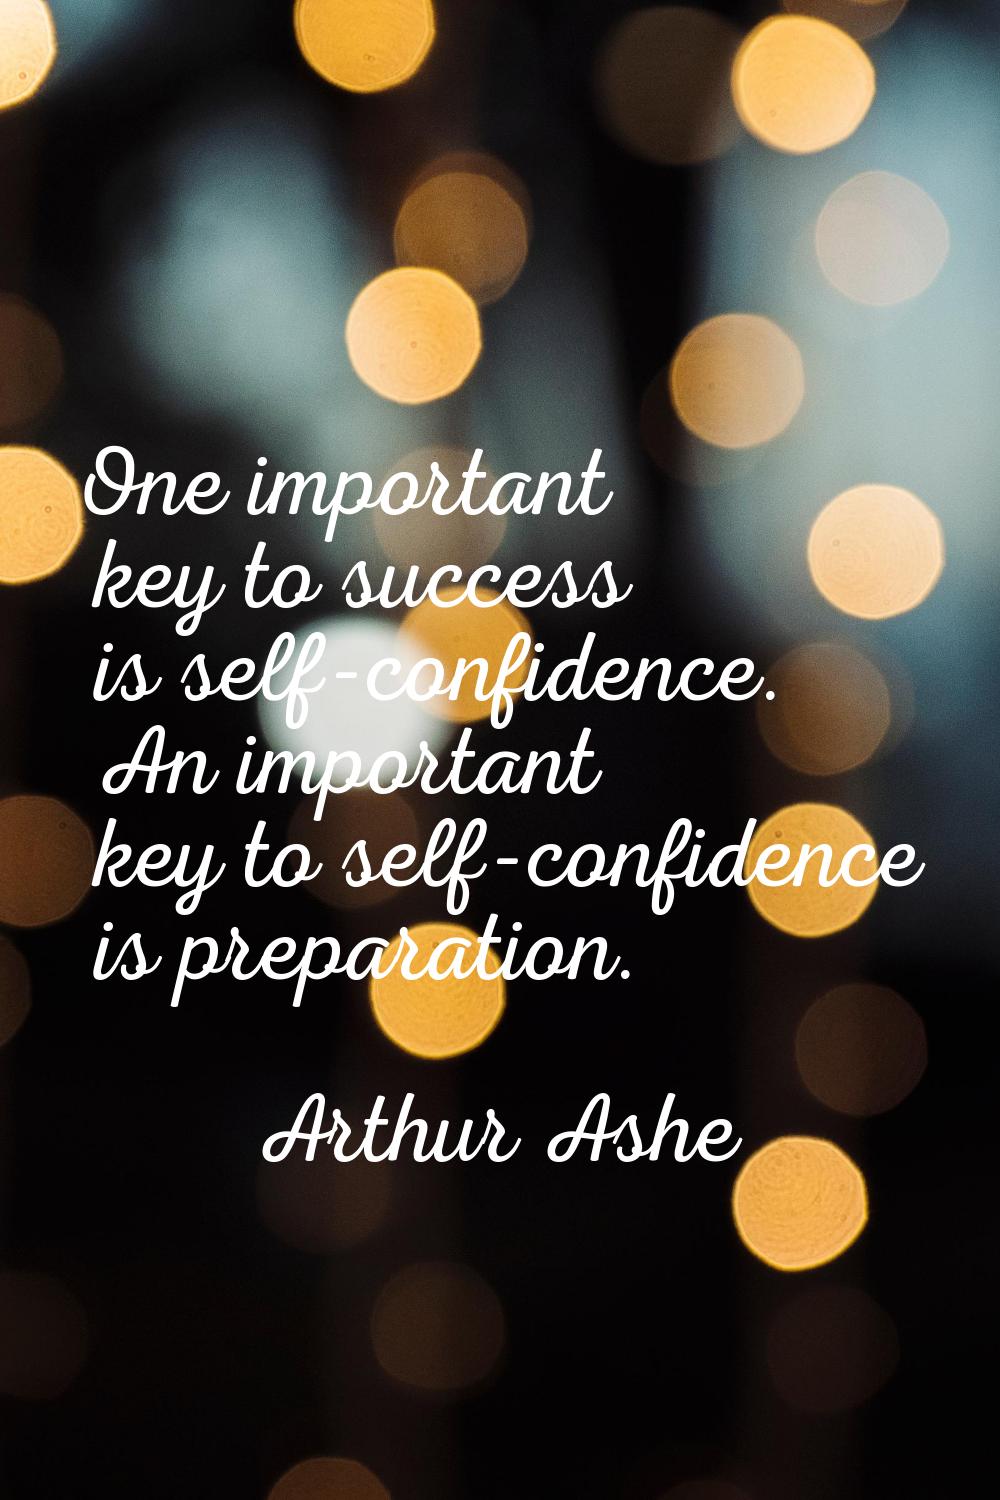 One important key to success is self-confidence. An important key to self-confidence is preparation